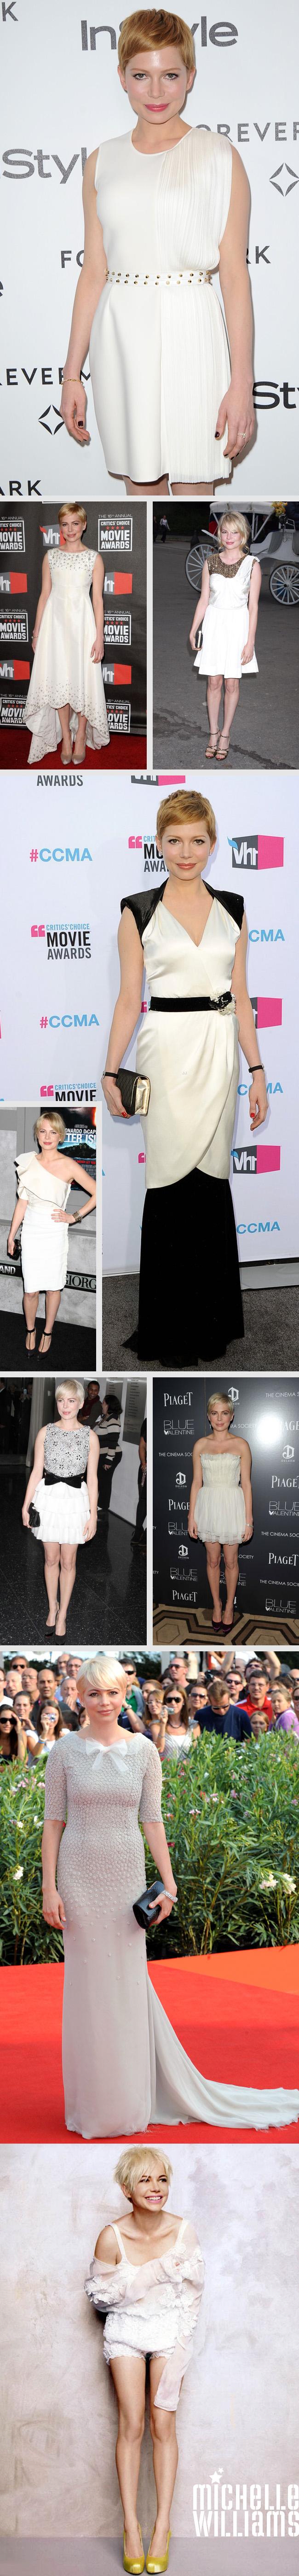 cool girls... michelle williams